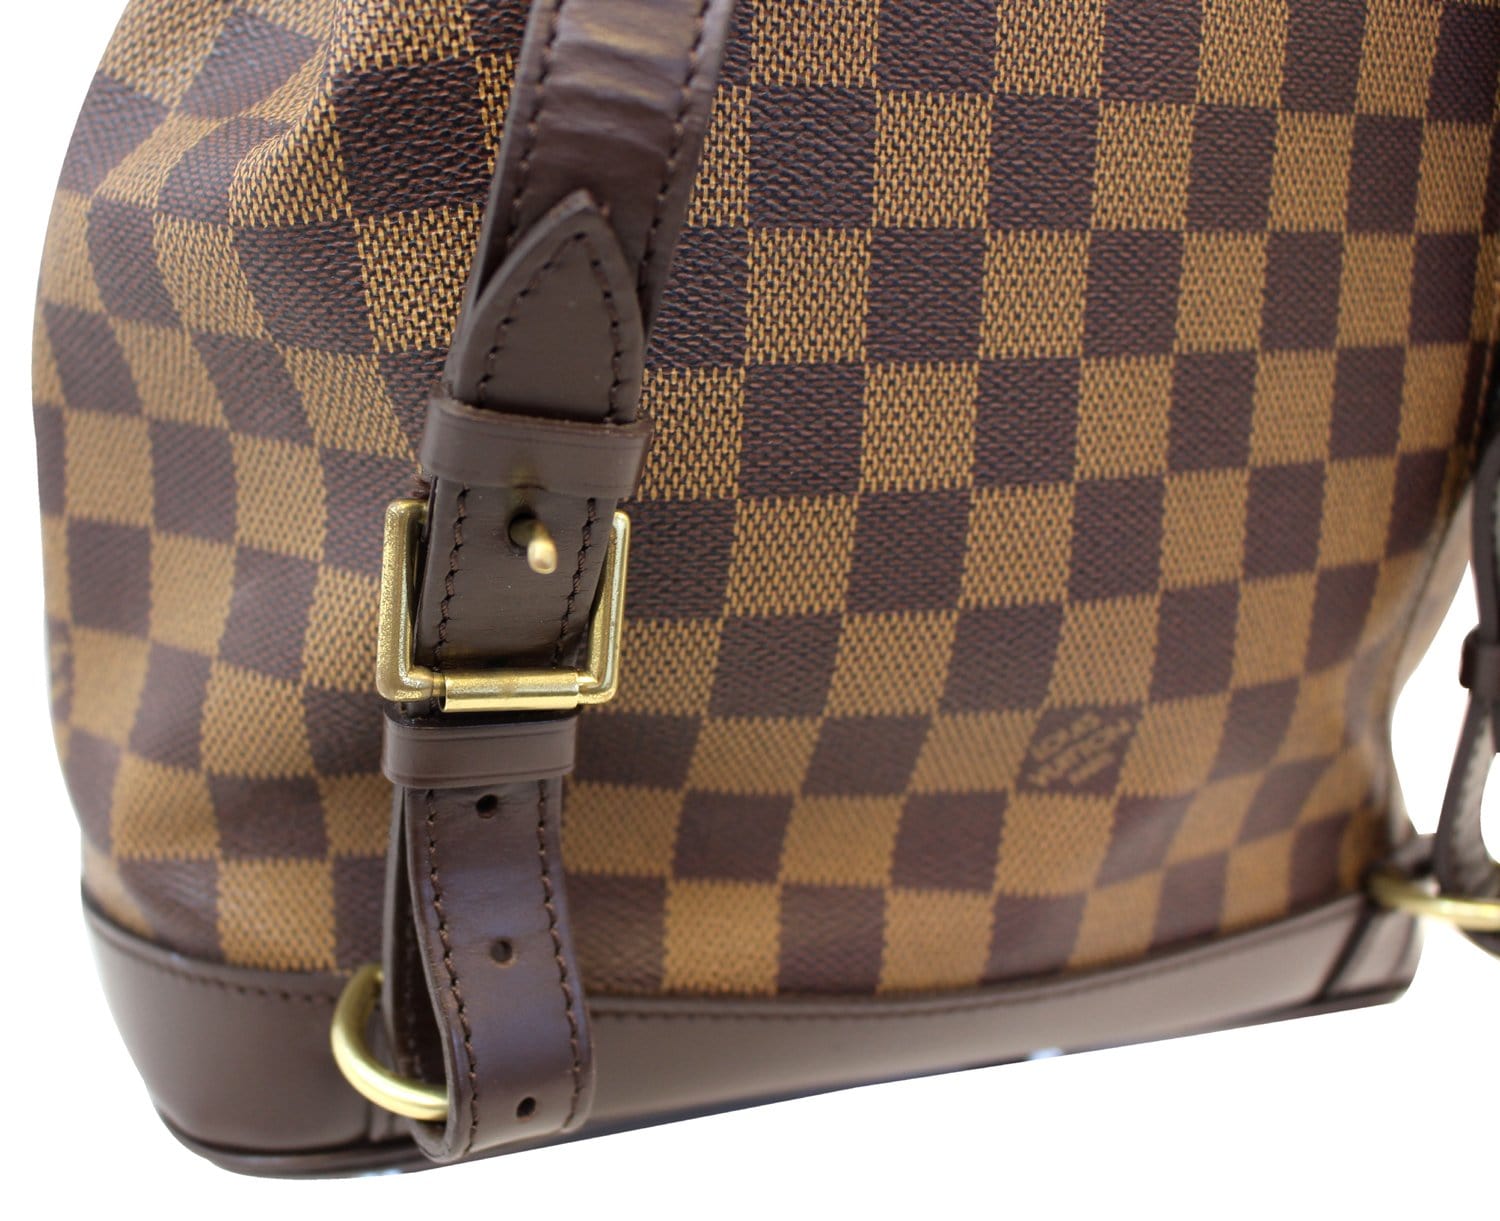 checkered backpack louis vuittons